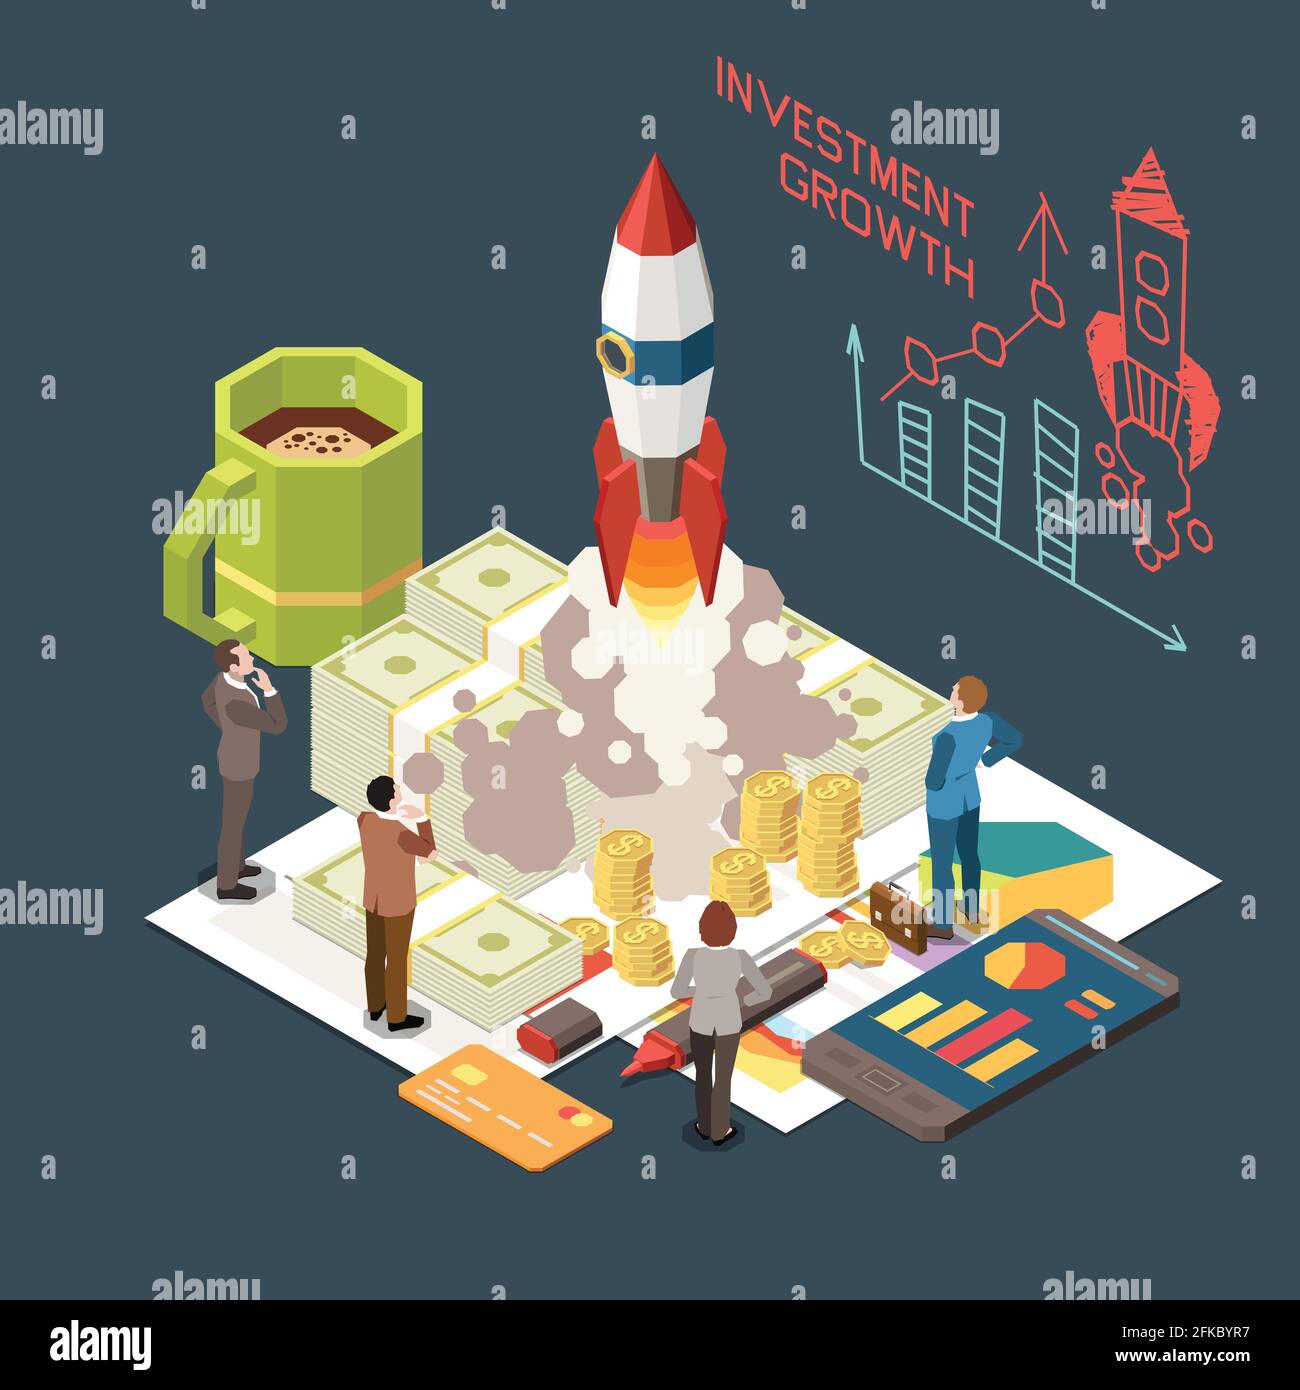 Investment growth isometric concept with rocket smartphone credit card and people 3d vector illustration Stock Vector